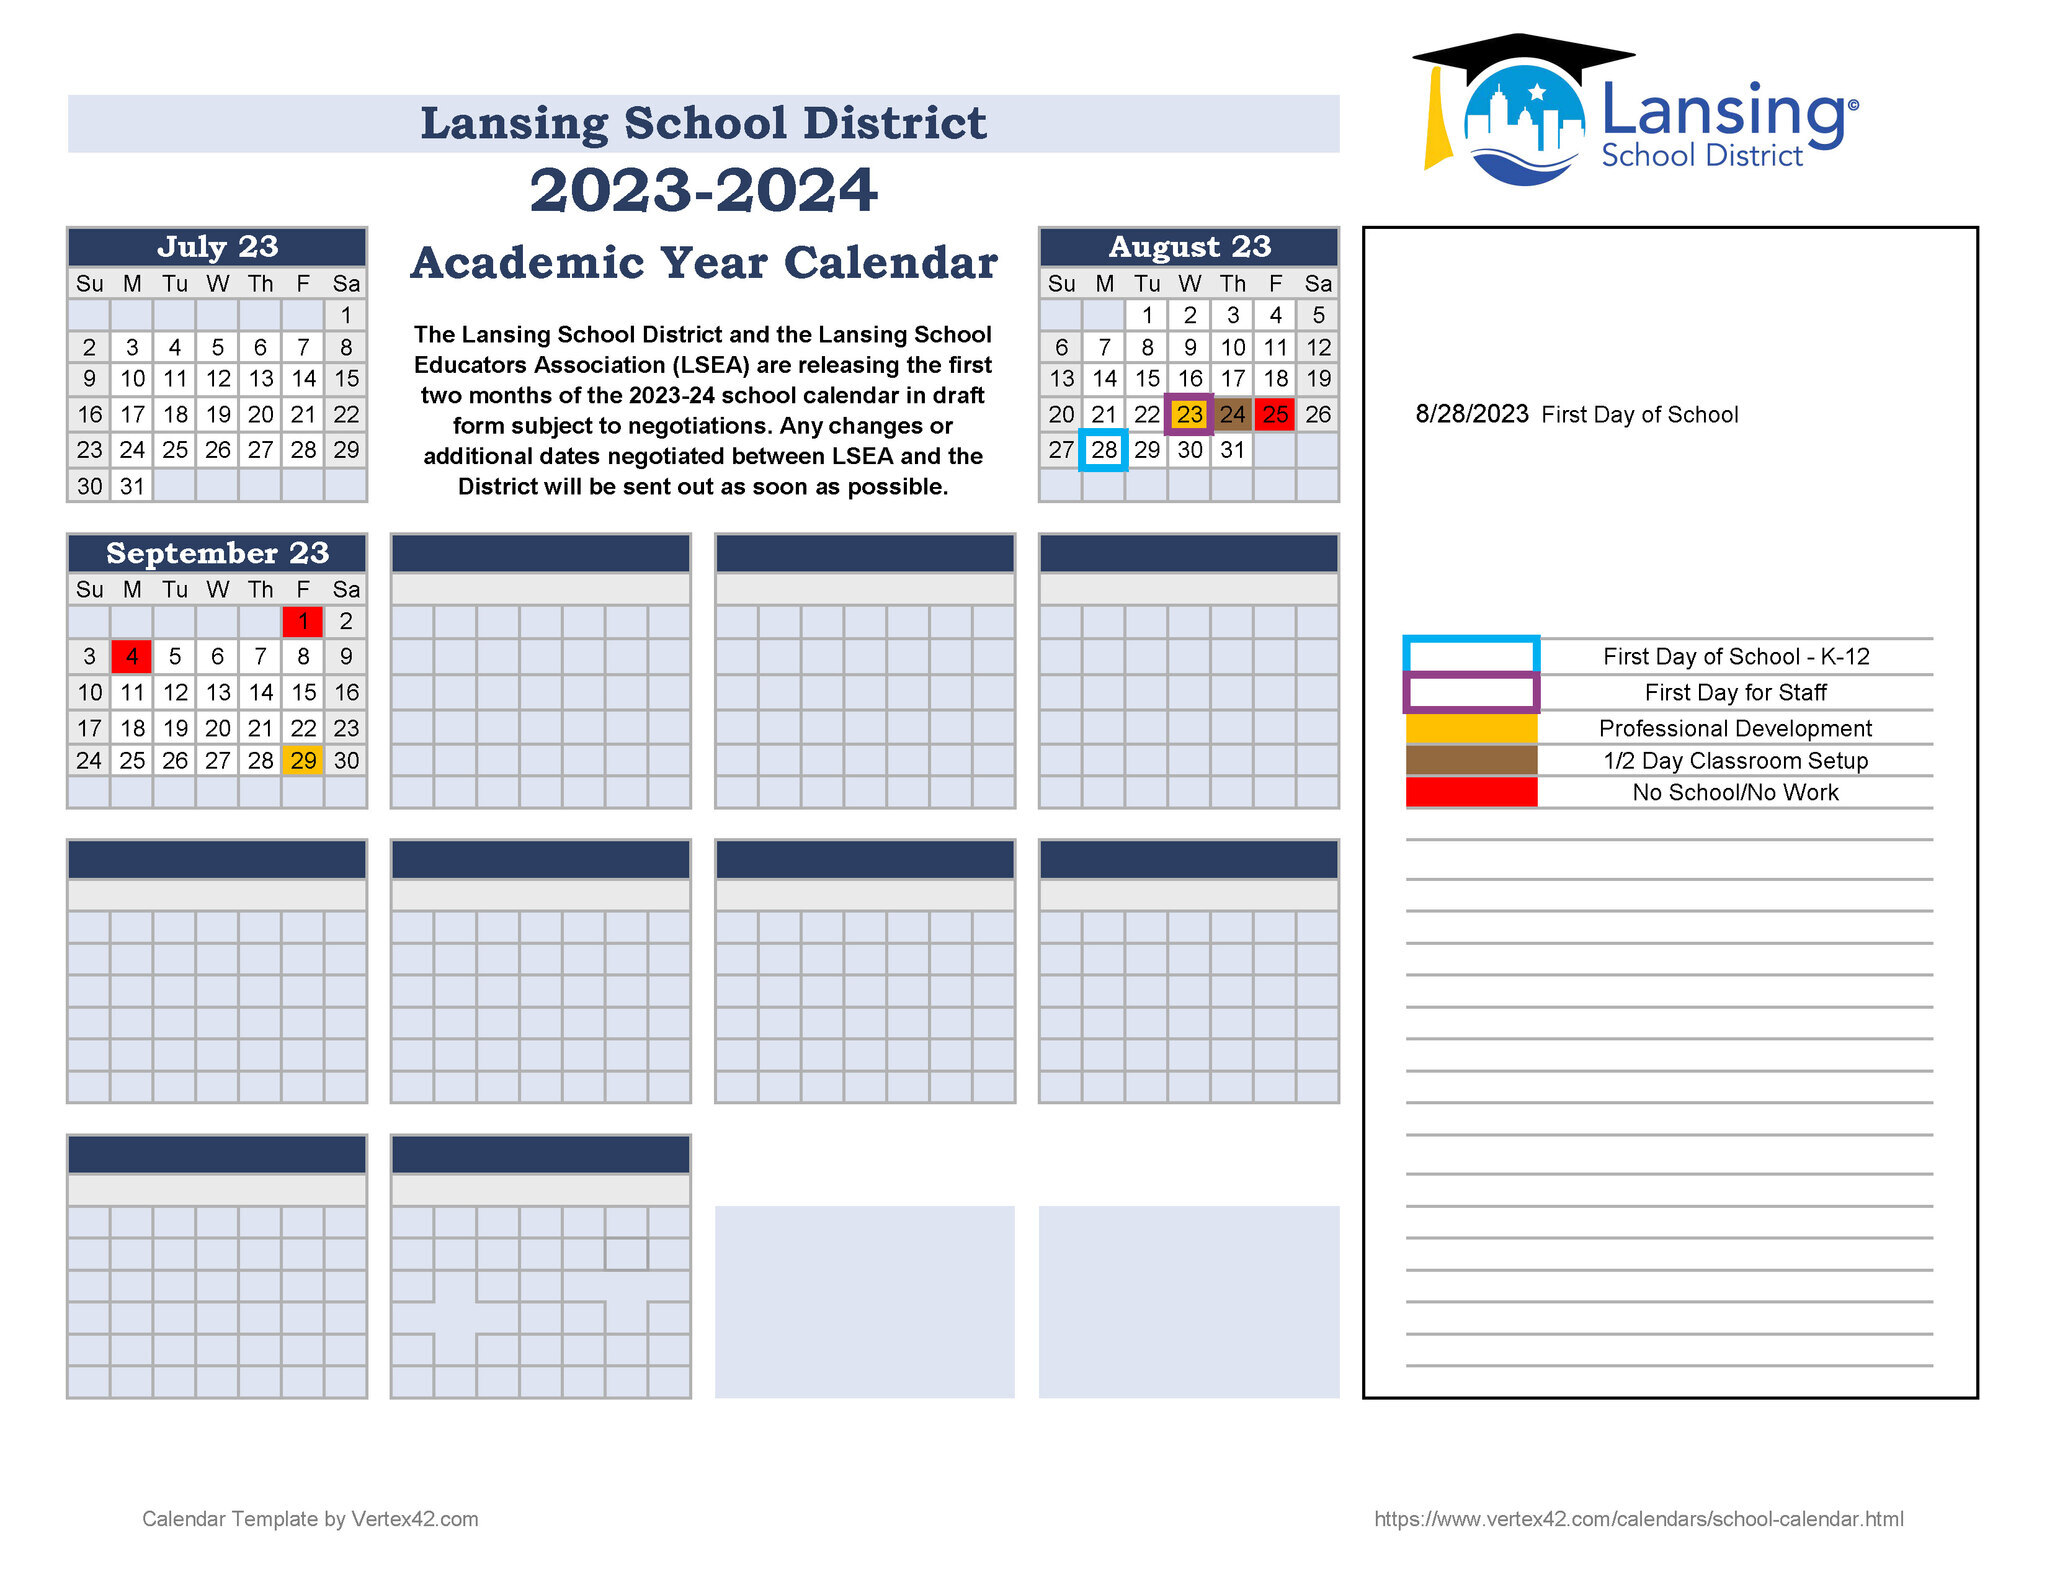 calendar-and-bell-times-parents-lansing-school-district-home